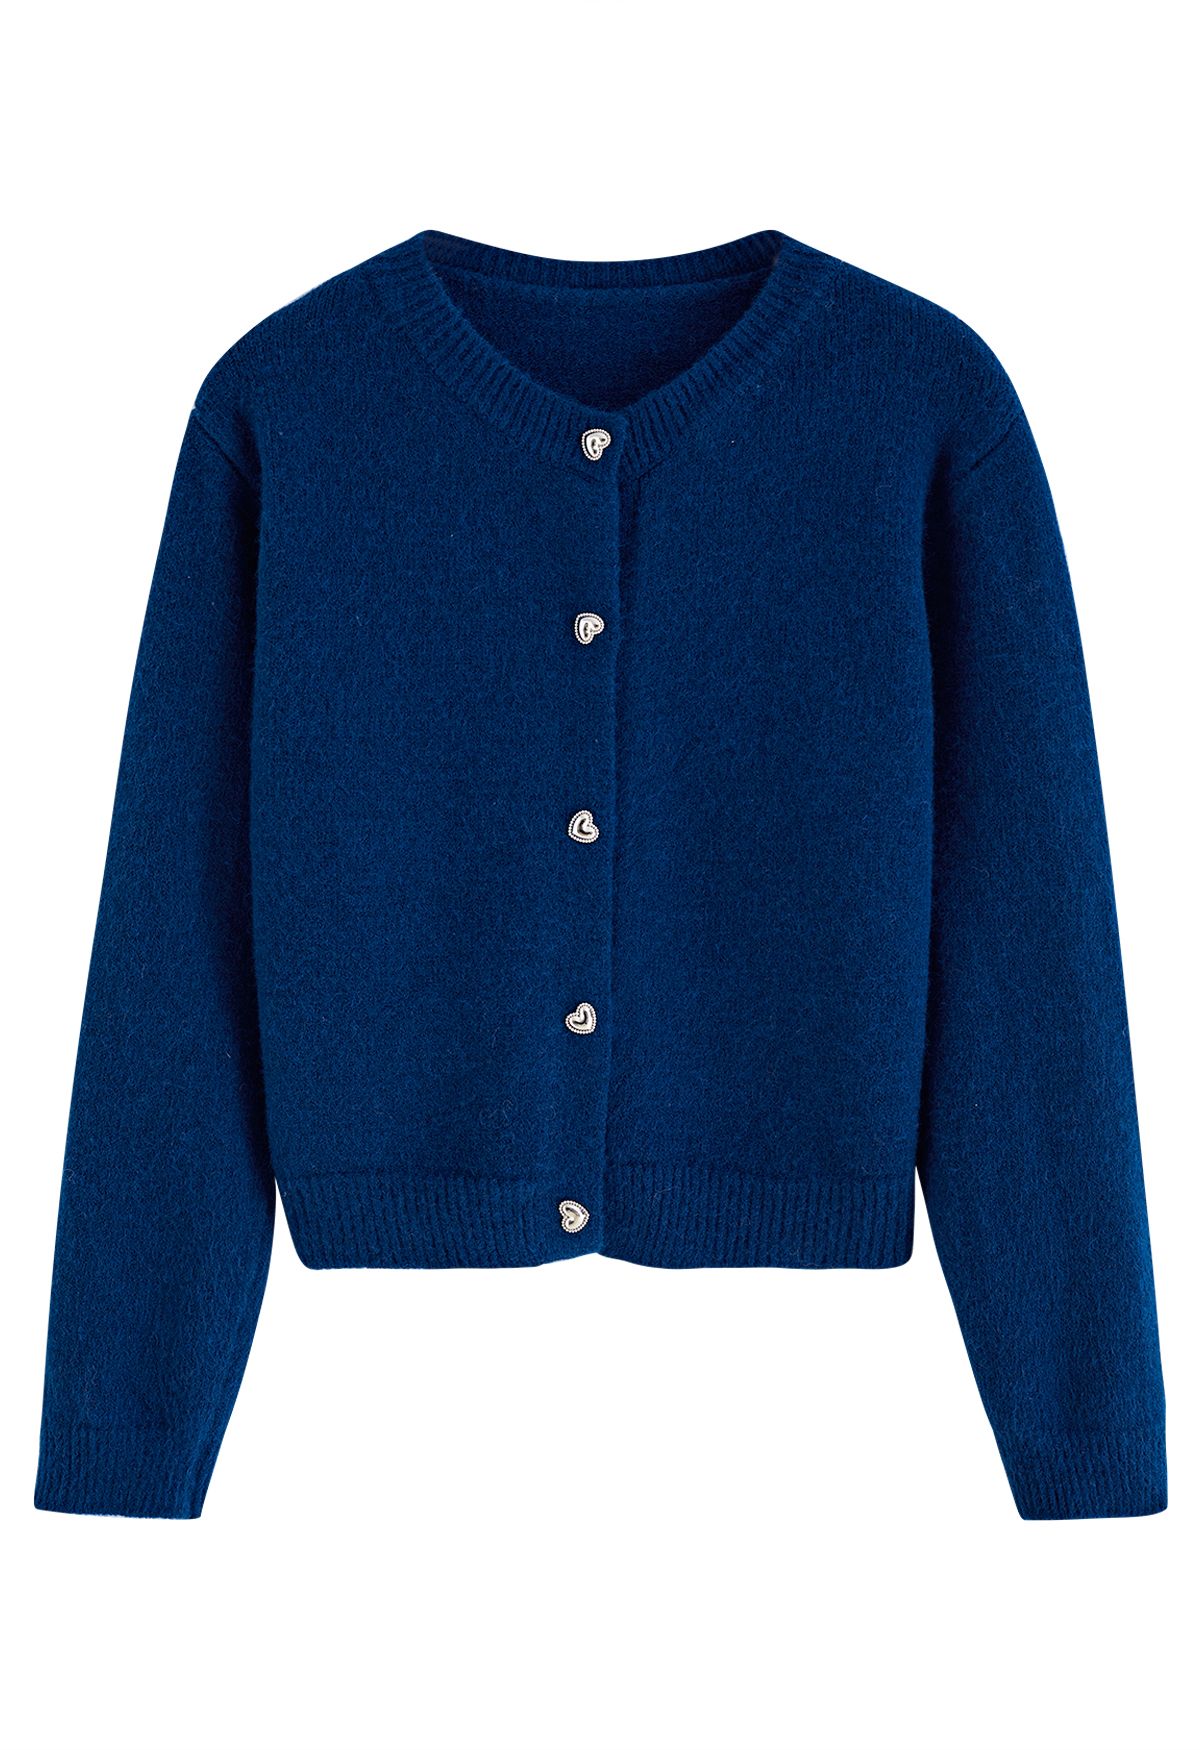 Heart-Shape Button Cropped Knit Cardigan in Indigo